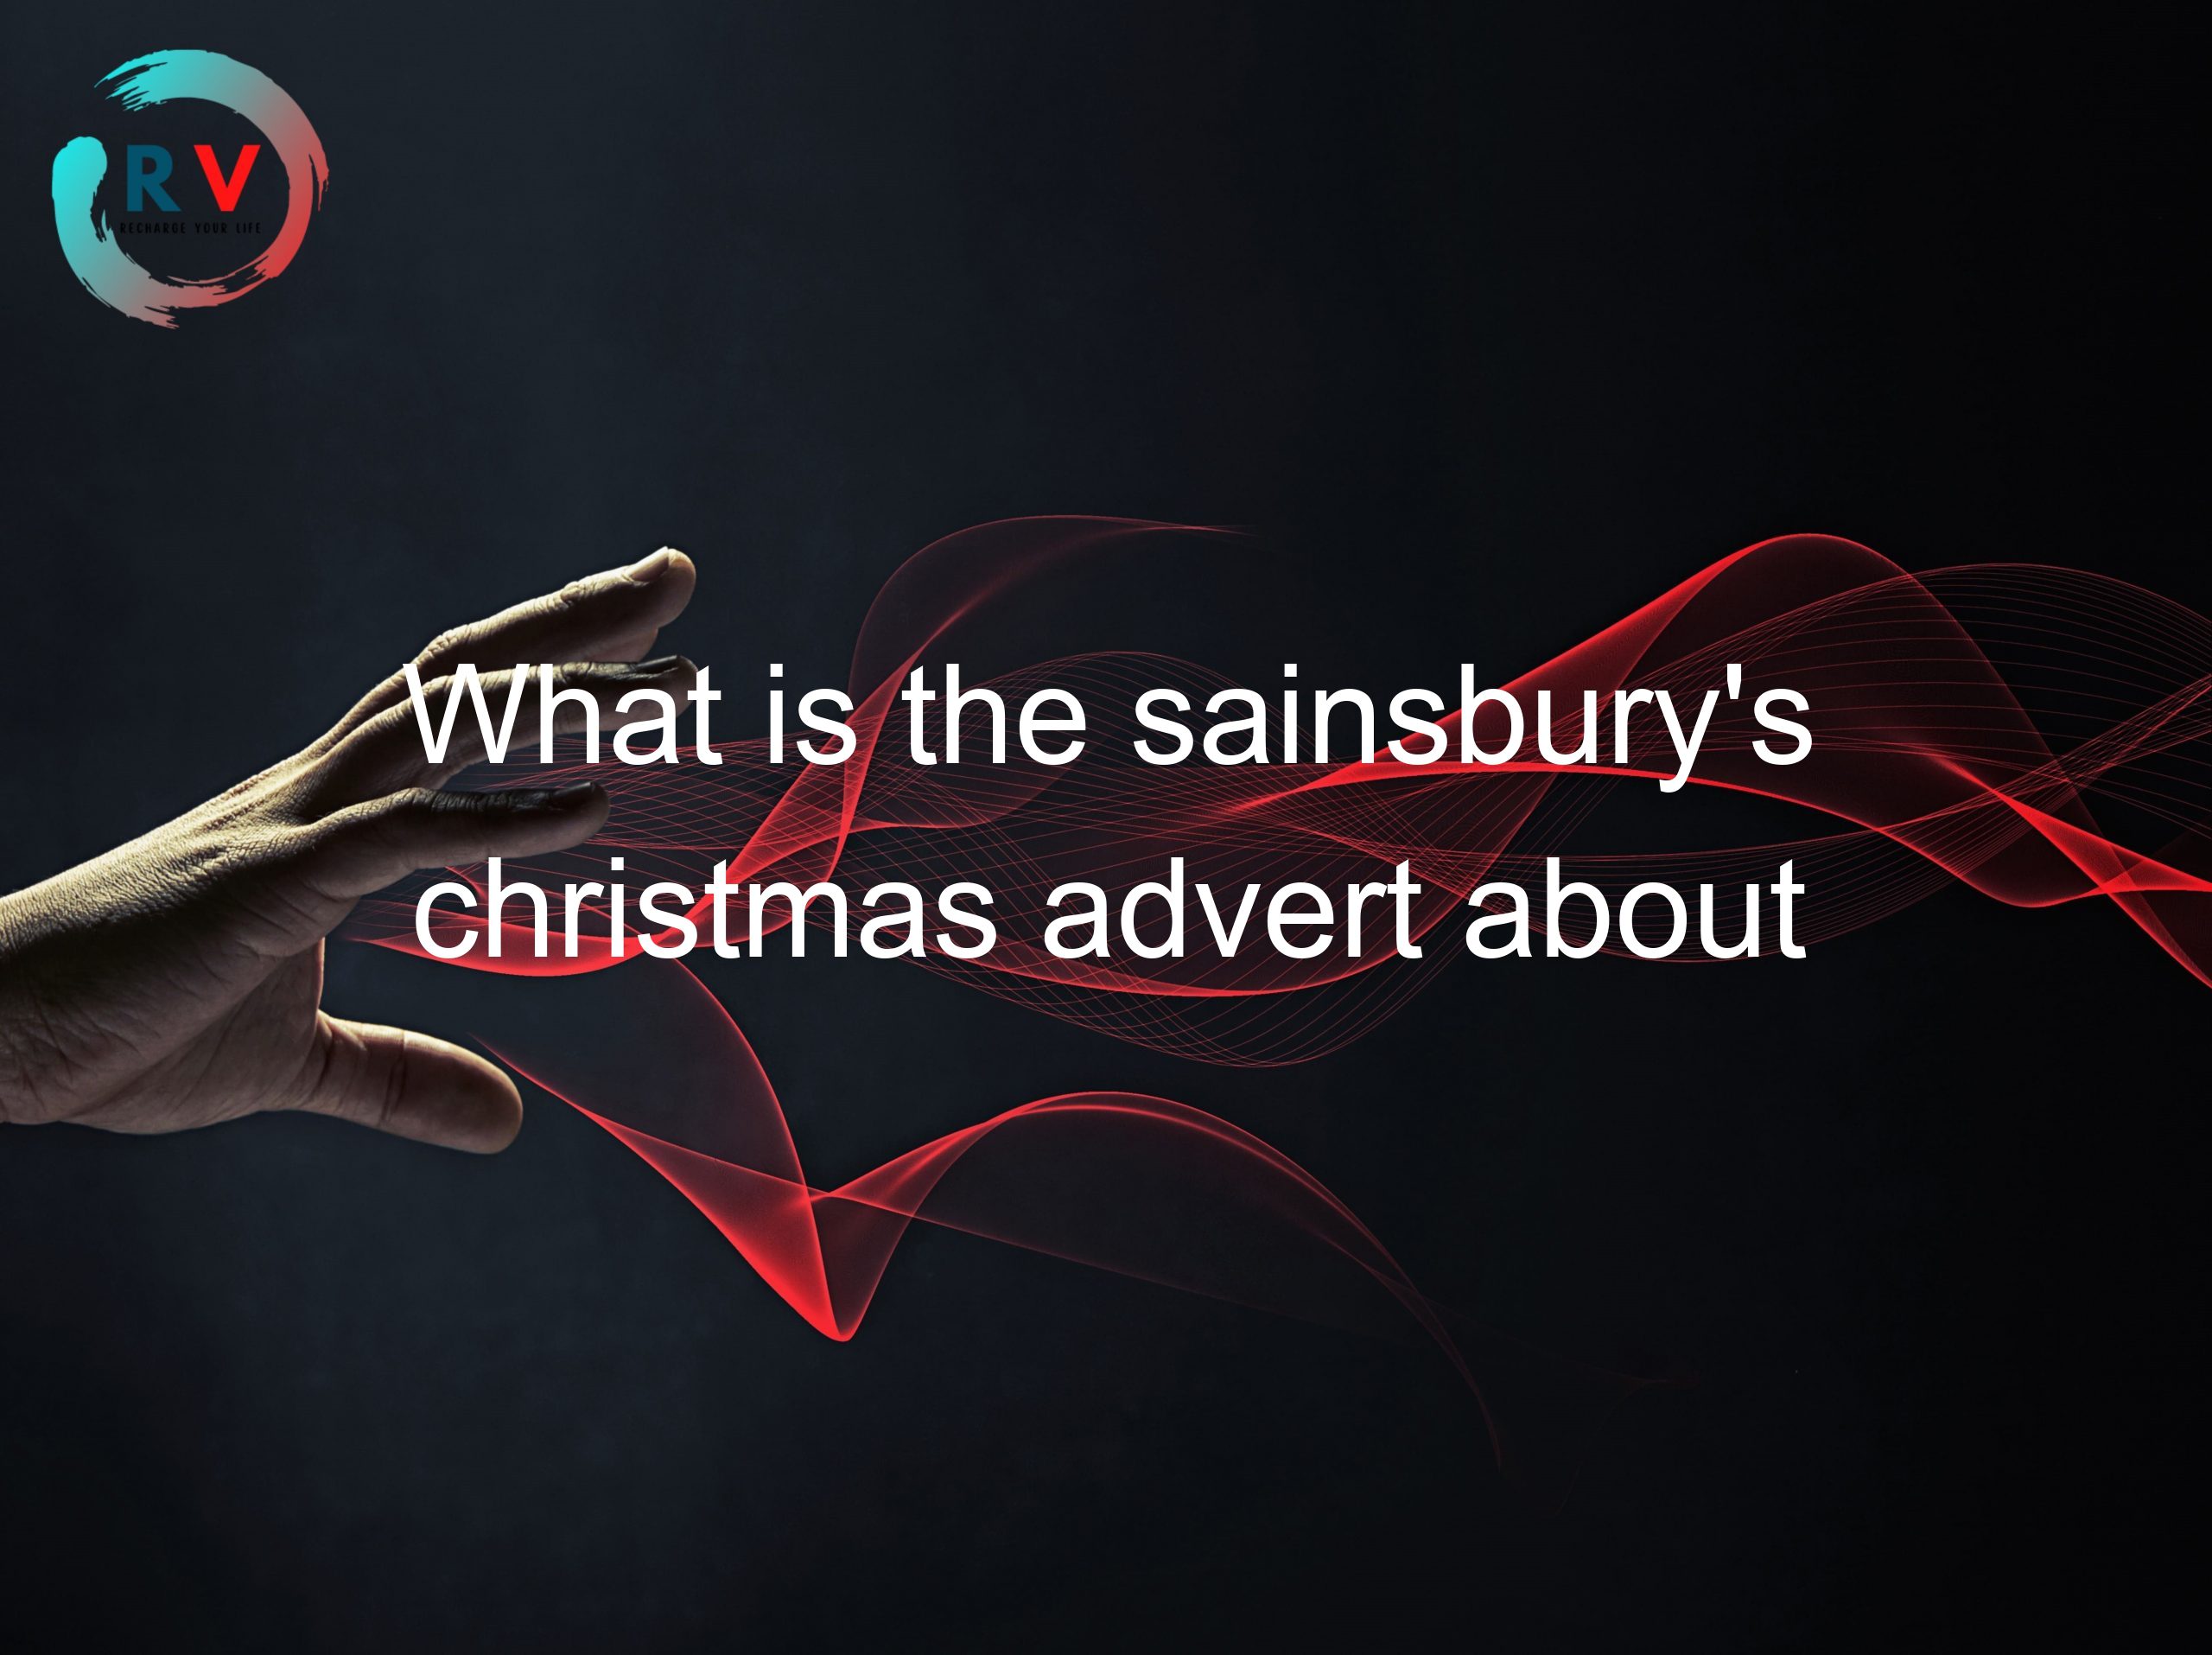 What is the sainsbury's christmas advert about